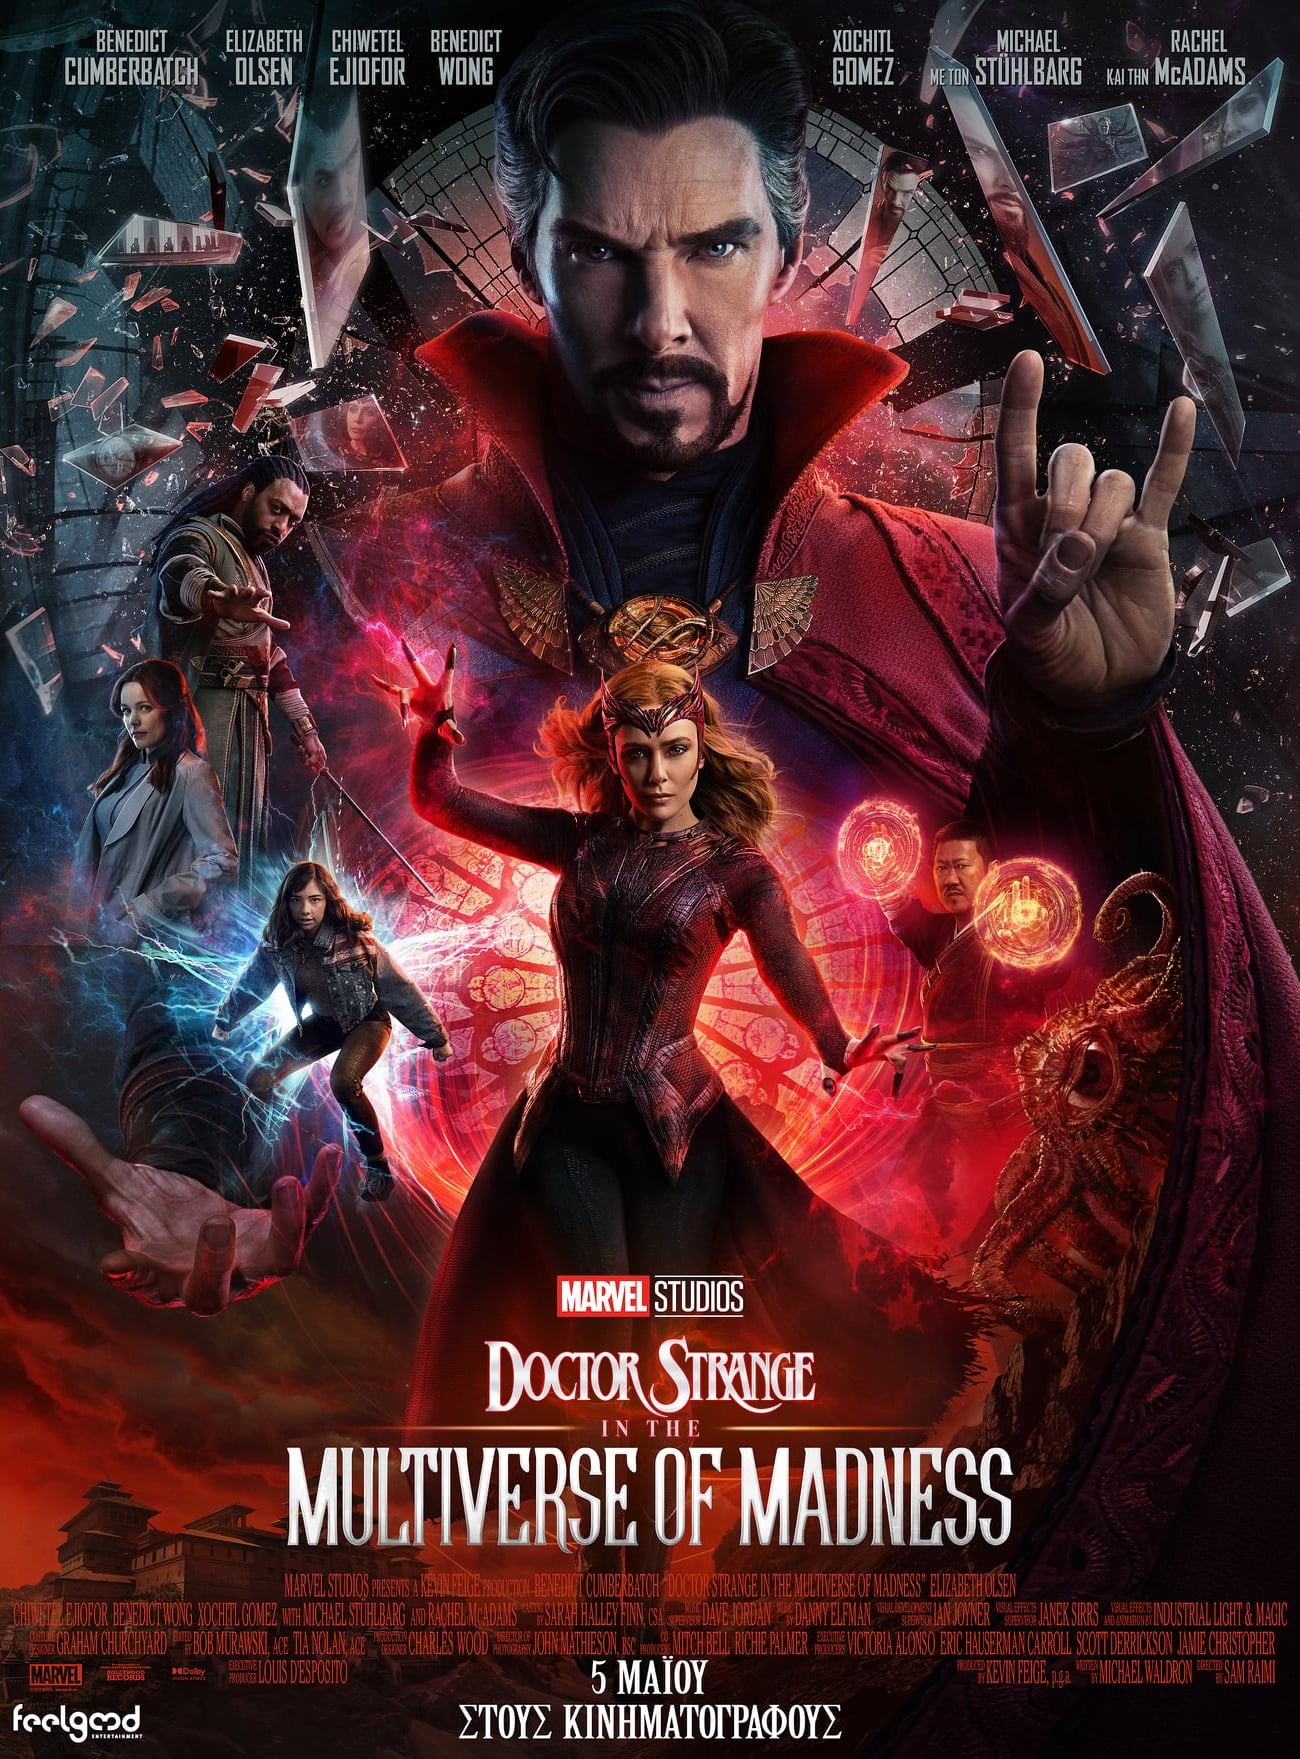 Poster for the movie "Doctor Strange in the Multiverse of Madness"